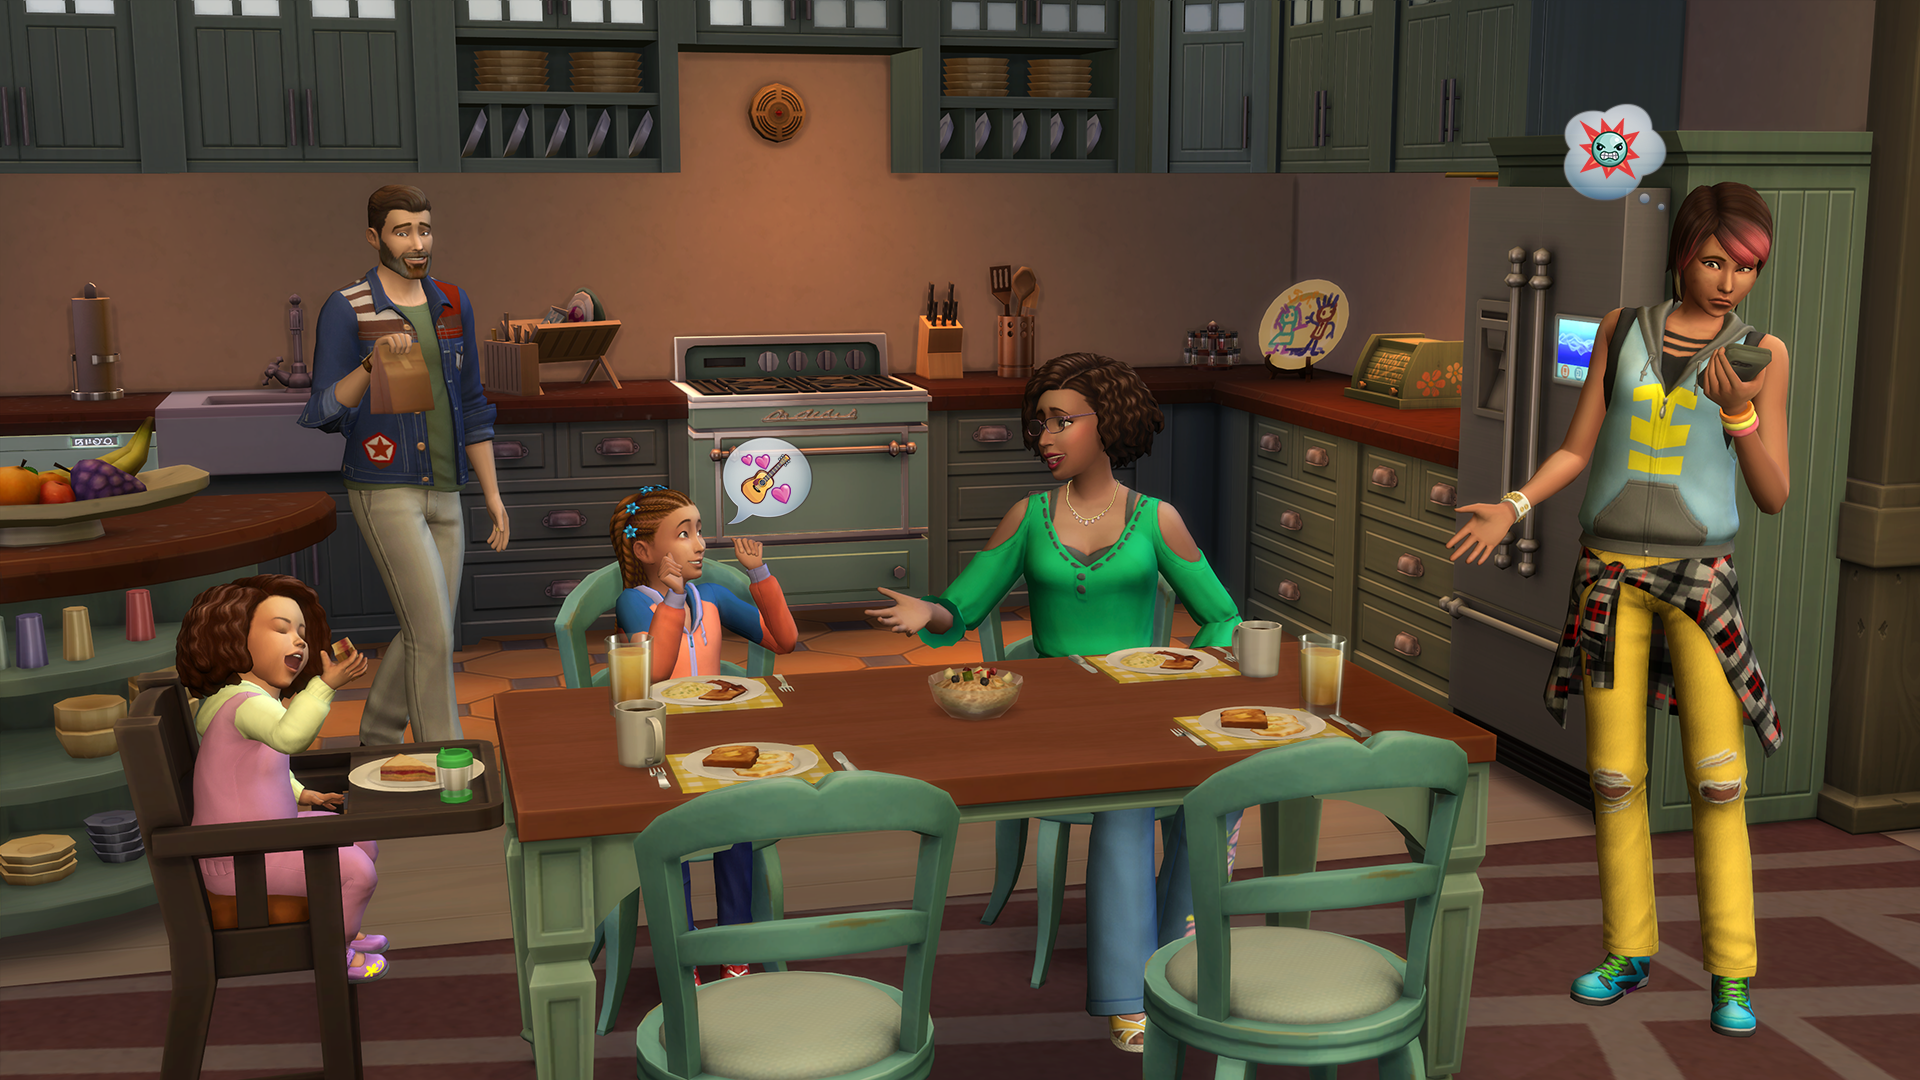 The Sims 4 Parenthood Game Pack Announced! – The Sims Legacy Challenge